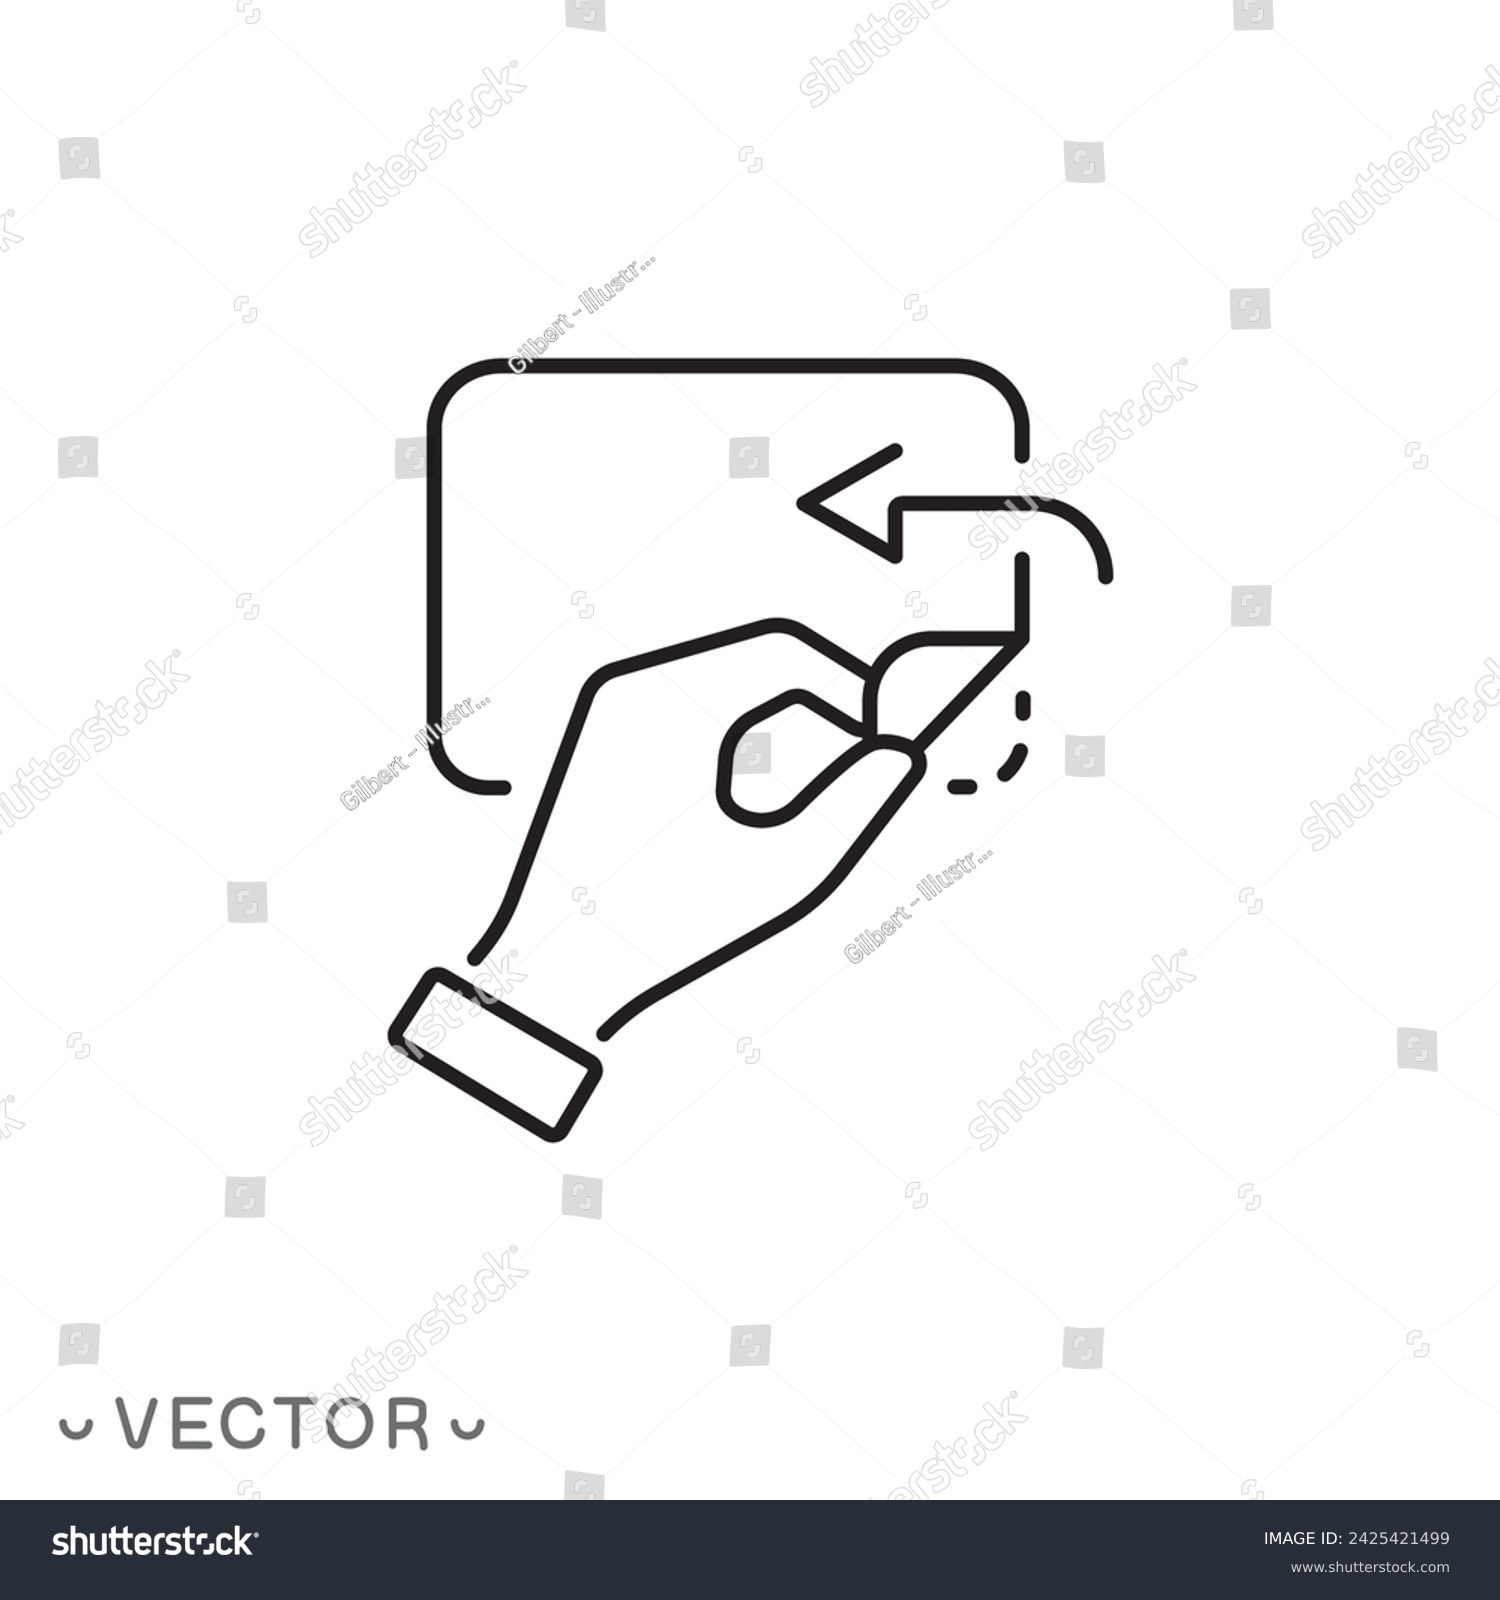 hand with sticker open icon, peel off duct tape, pull by hand to opened up, thin line symbol isolated on white background, editable stroke eps 10 vector illustration #2425421499